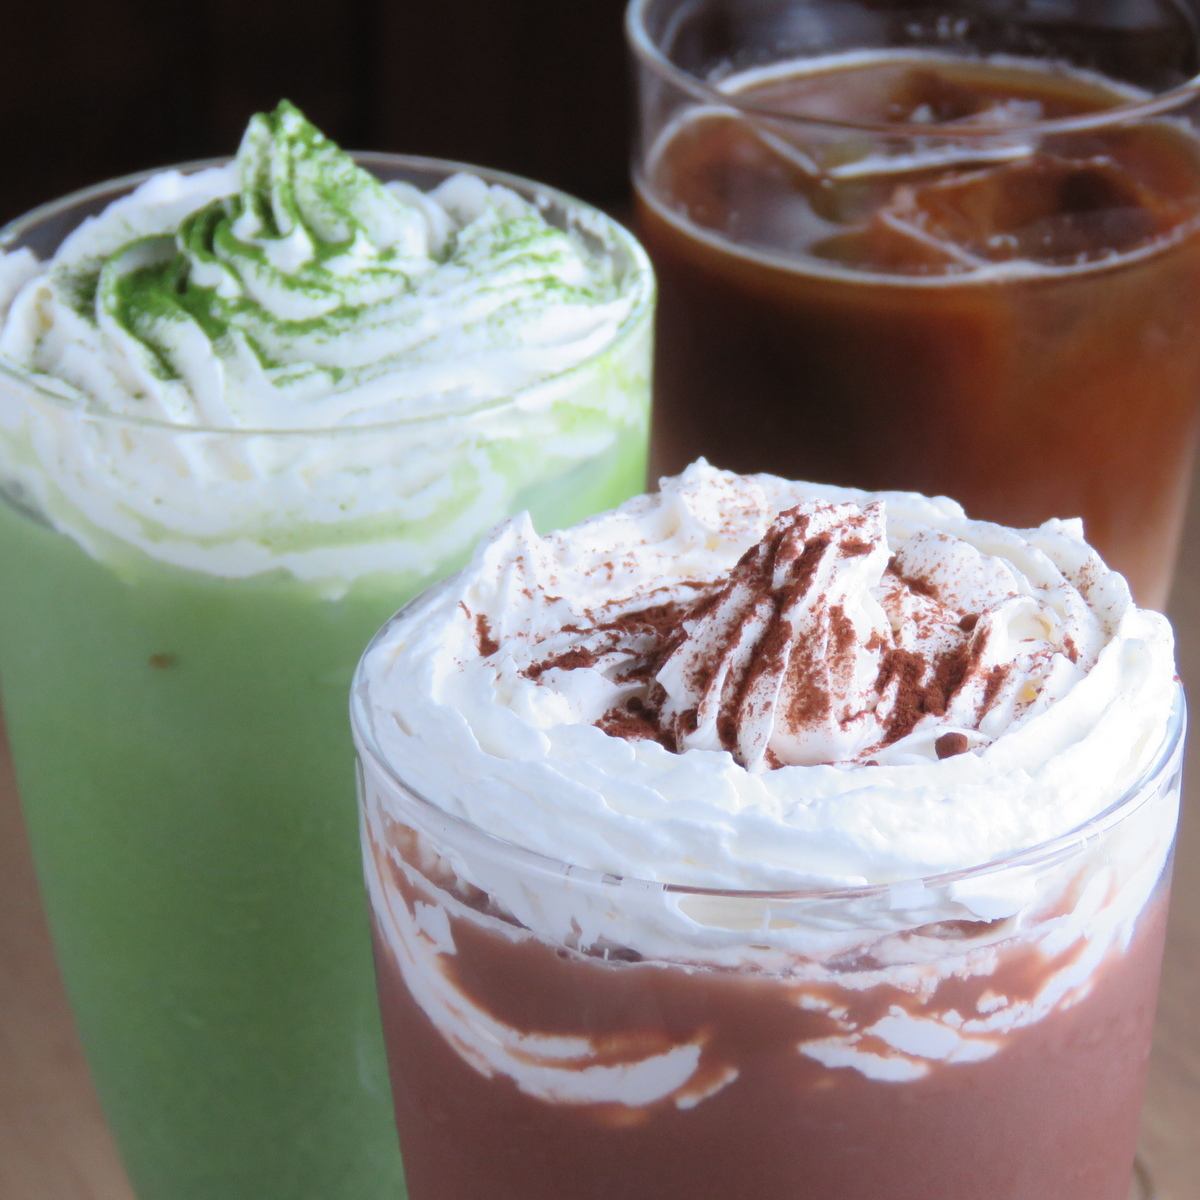 [Various drinks] We have a wide variety of homemade drinks available.